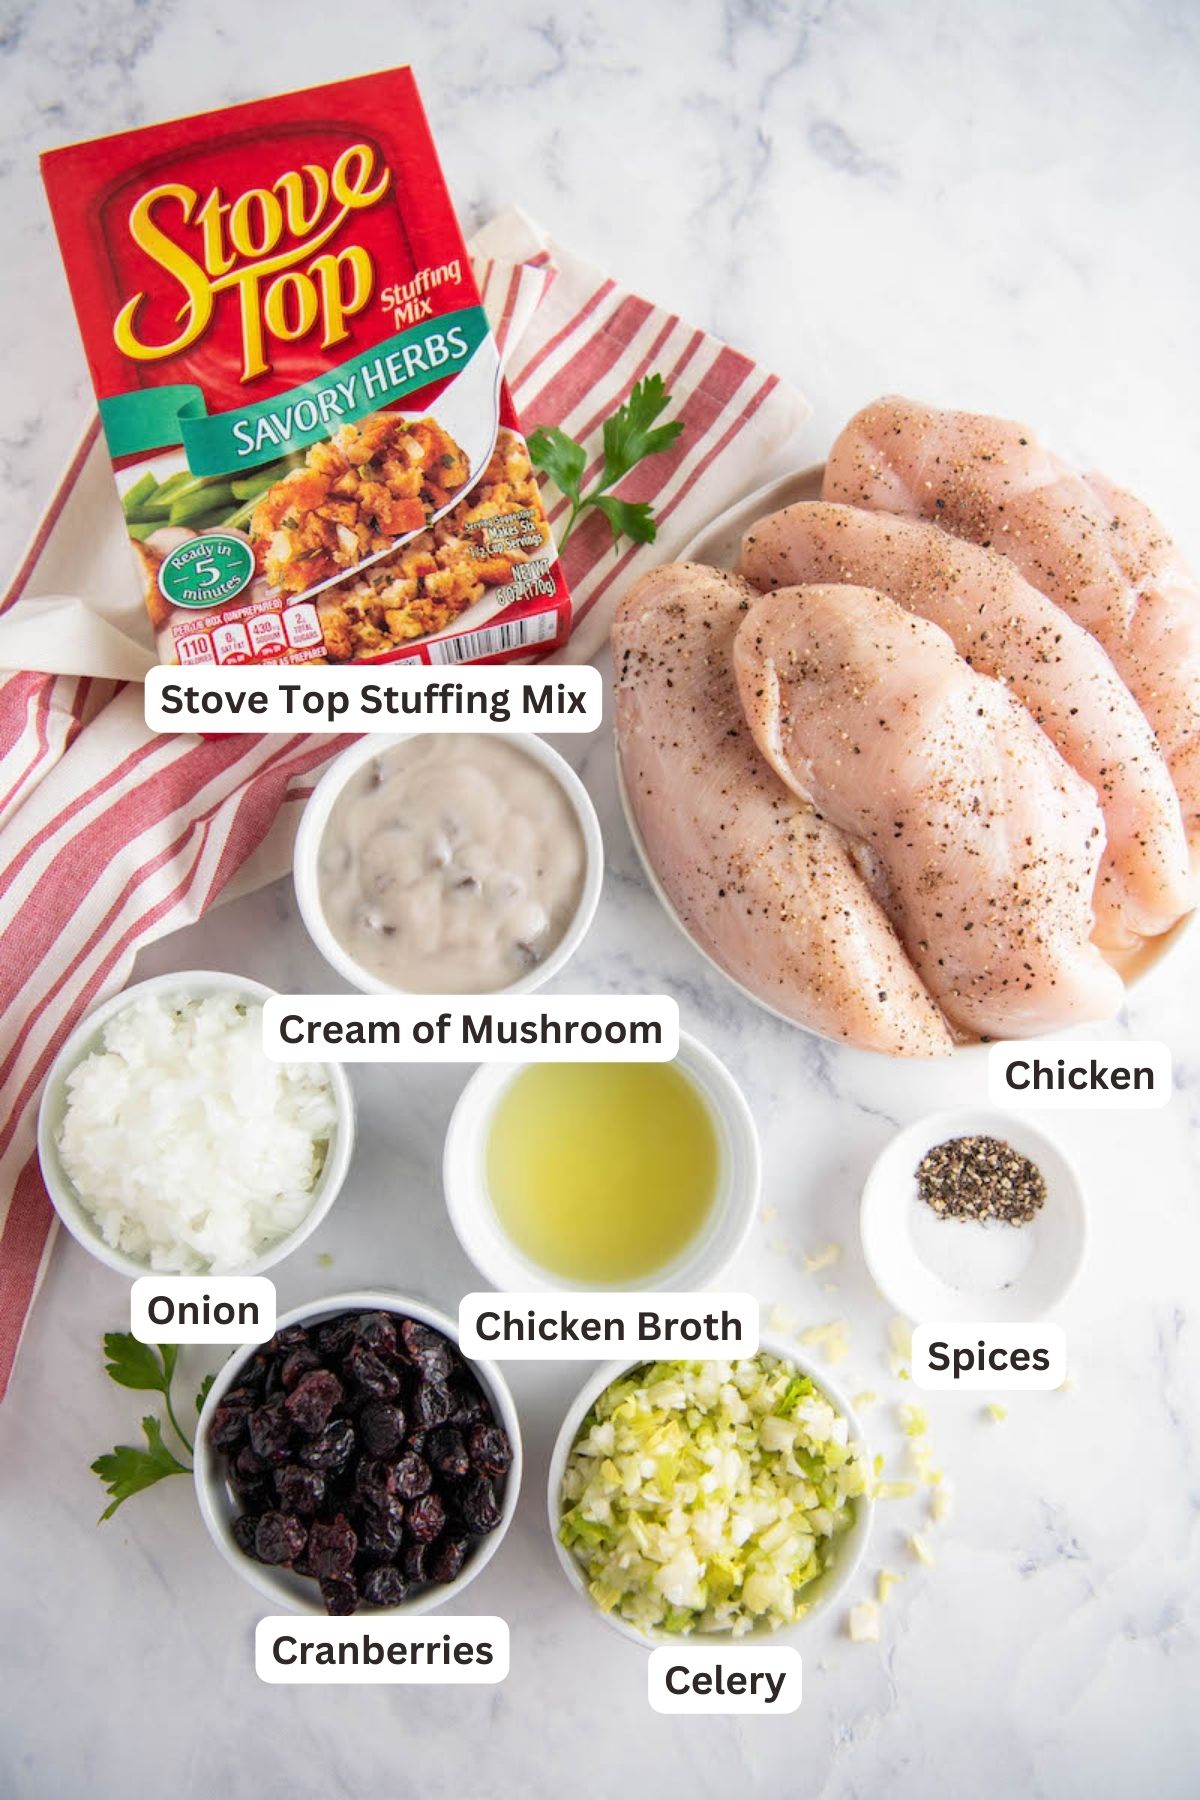 Ingredients for Stuffing Stuffed Chicken Breast.